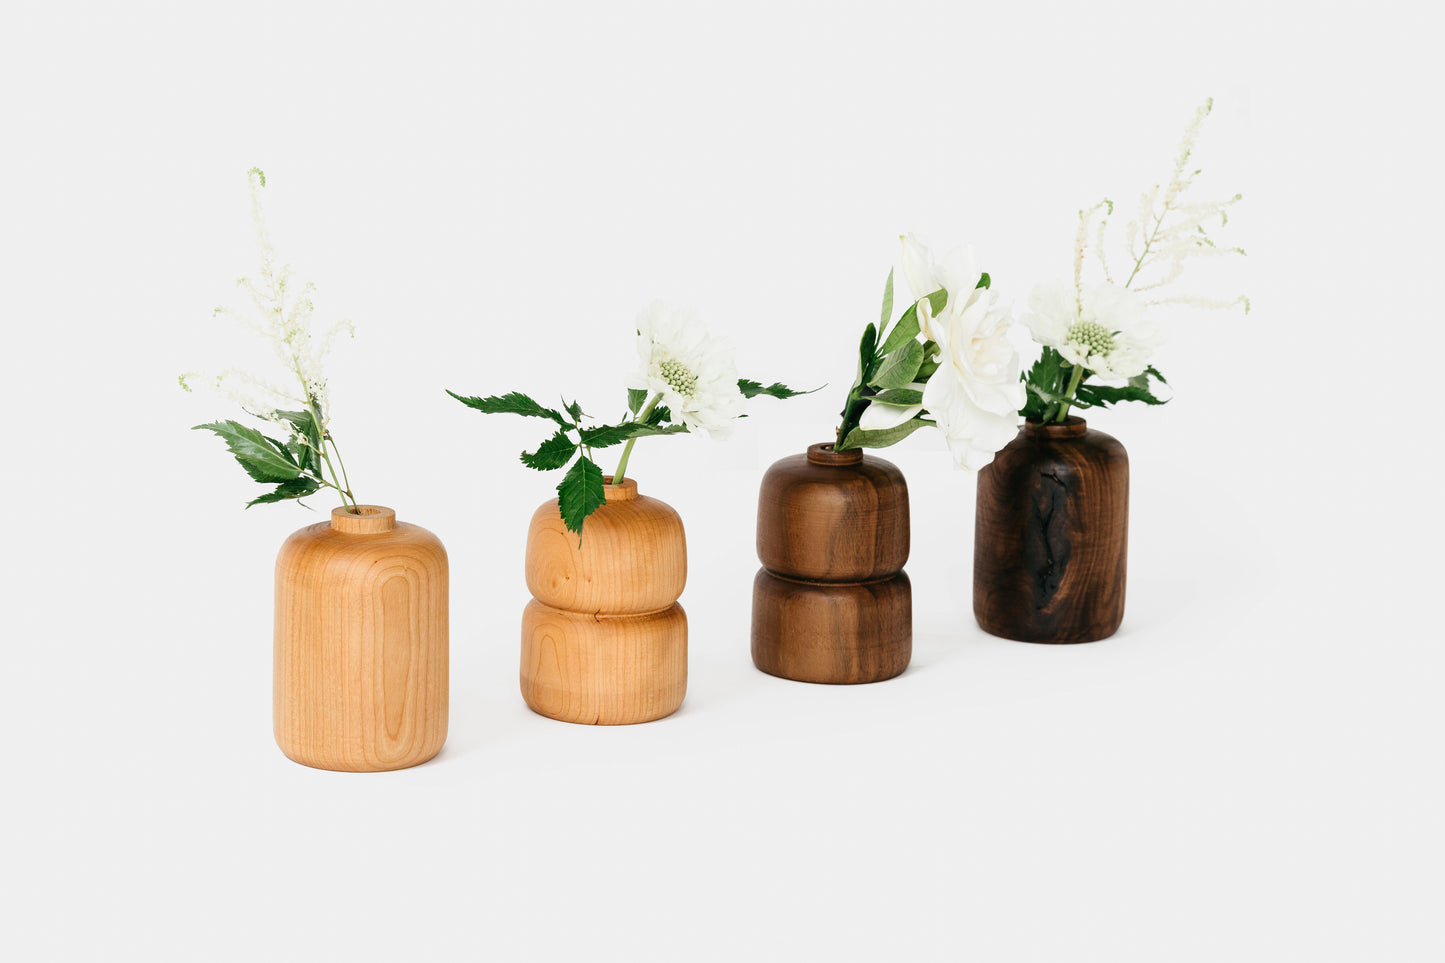 Straight bud and double bud vases shown in cherry and walnut wood. Vases have large white fresh flowers.